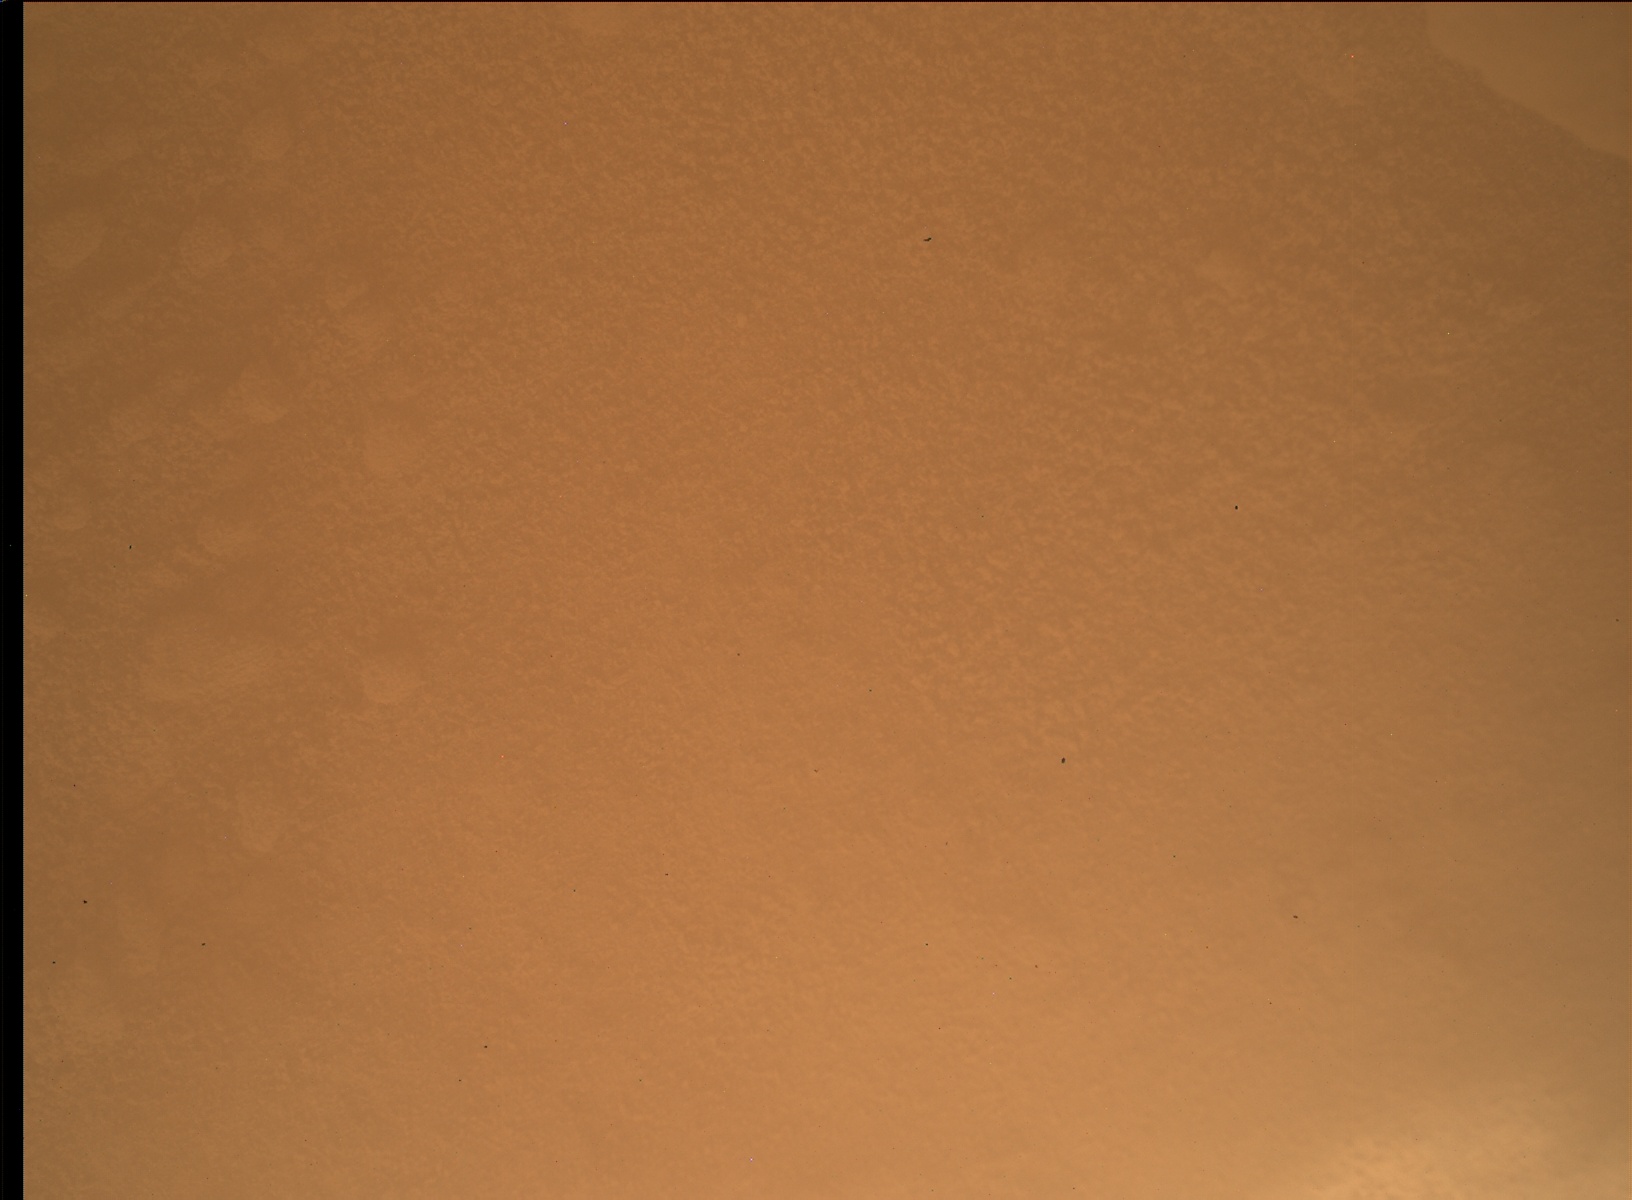 Nasa's Mars rover Curiosity acquired this image using its Mars Hand Lens Imager (MAHLI) on Sol 1356